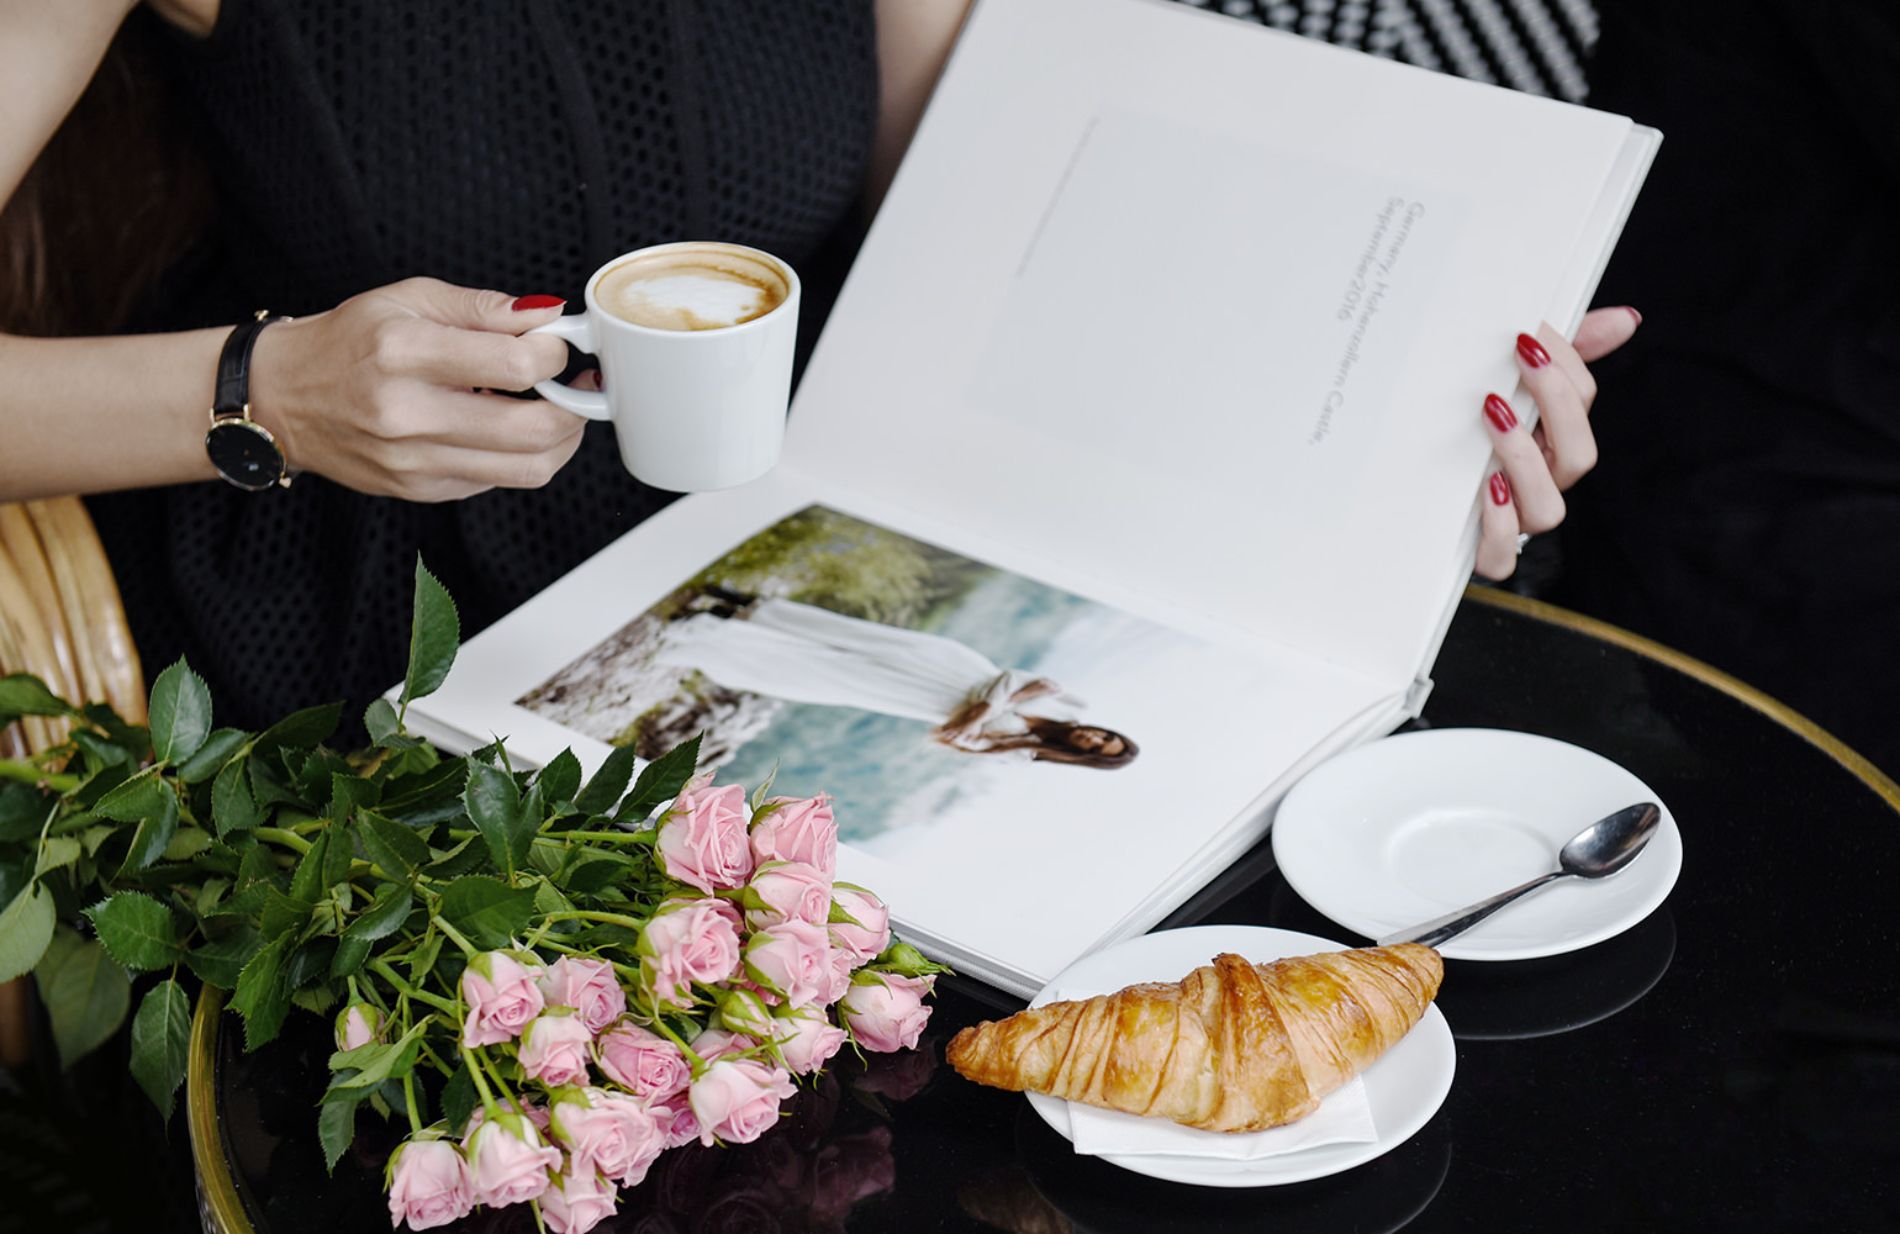 Woman looking through a portrait photo book at a table with coffee, roses and croissant.